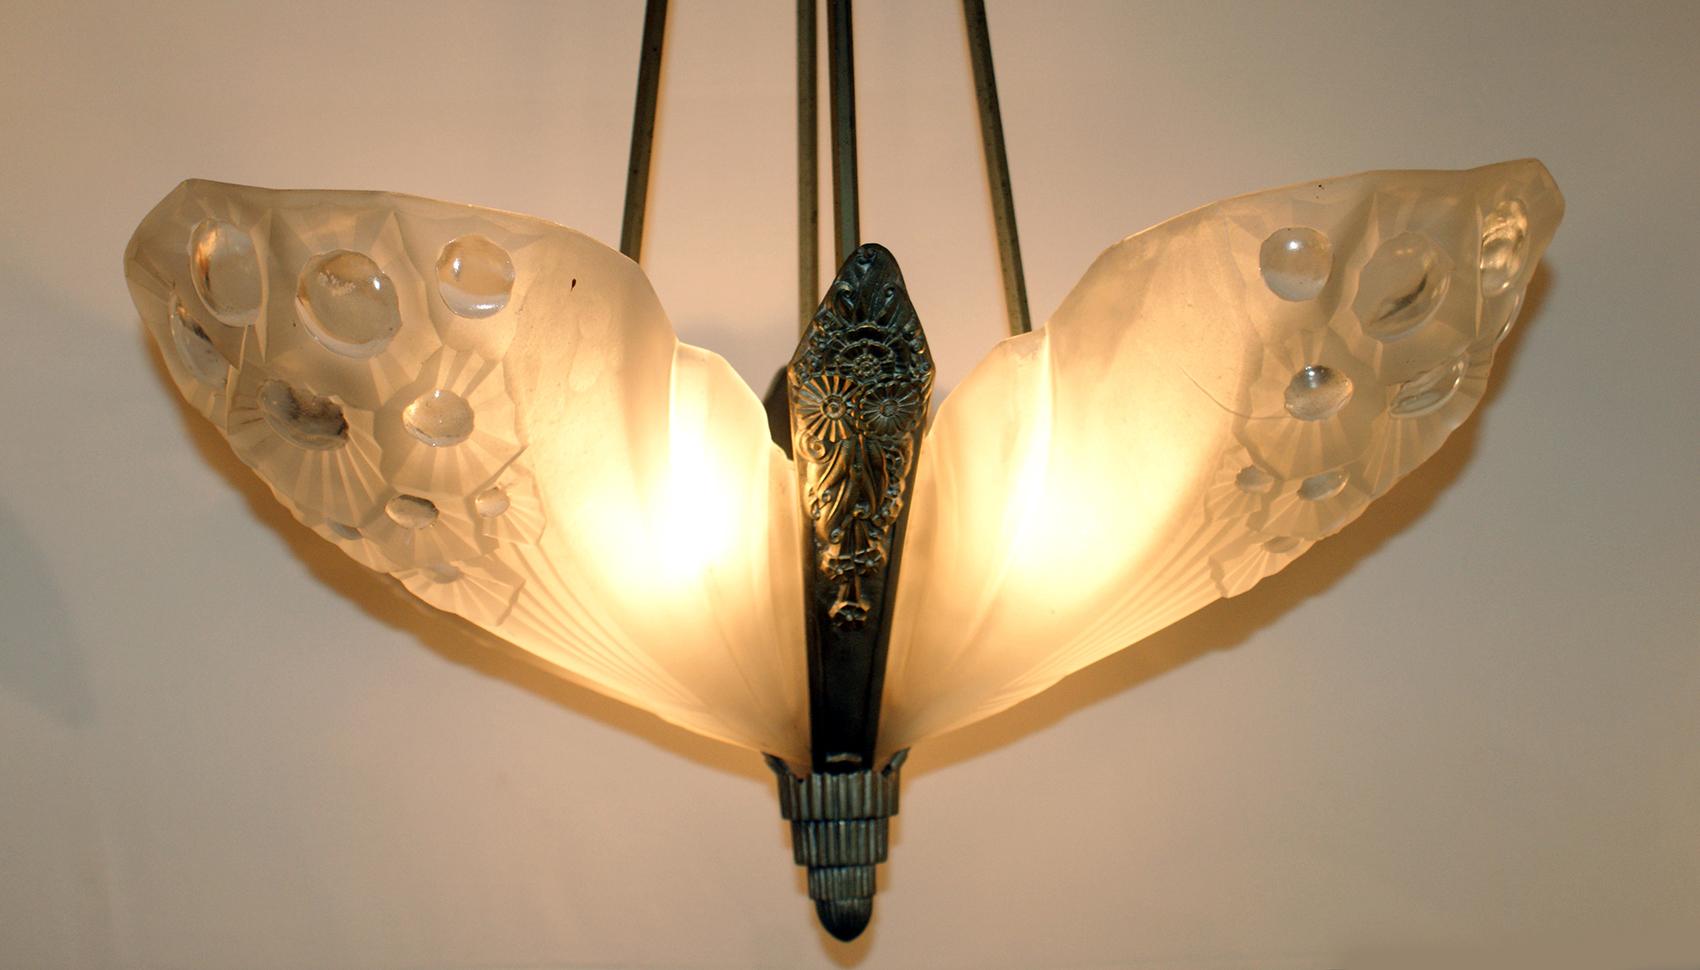 French Art Deco pendant chandelier consist of four original beautiful panels entitled “Oeil de perdrix” partridge eye, marked by Muller in Frosted glass with geometric flower design mounted on a nickel bronze support frame with decorative motif